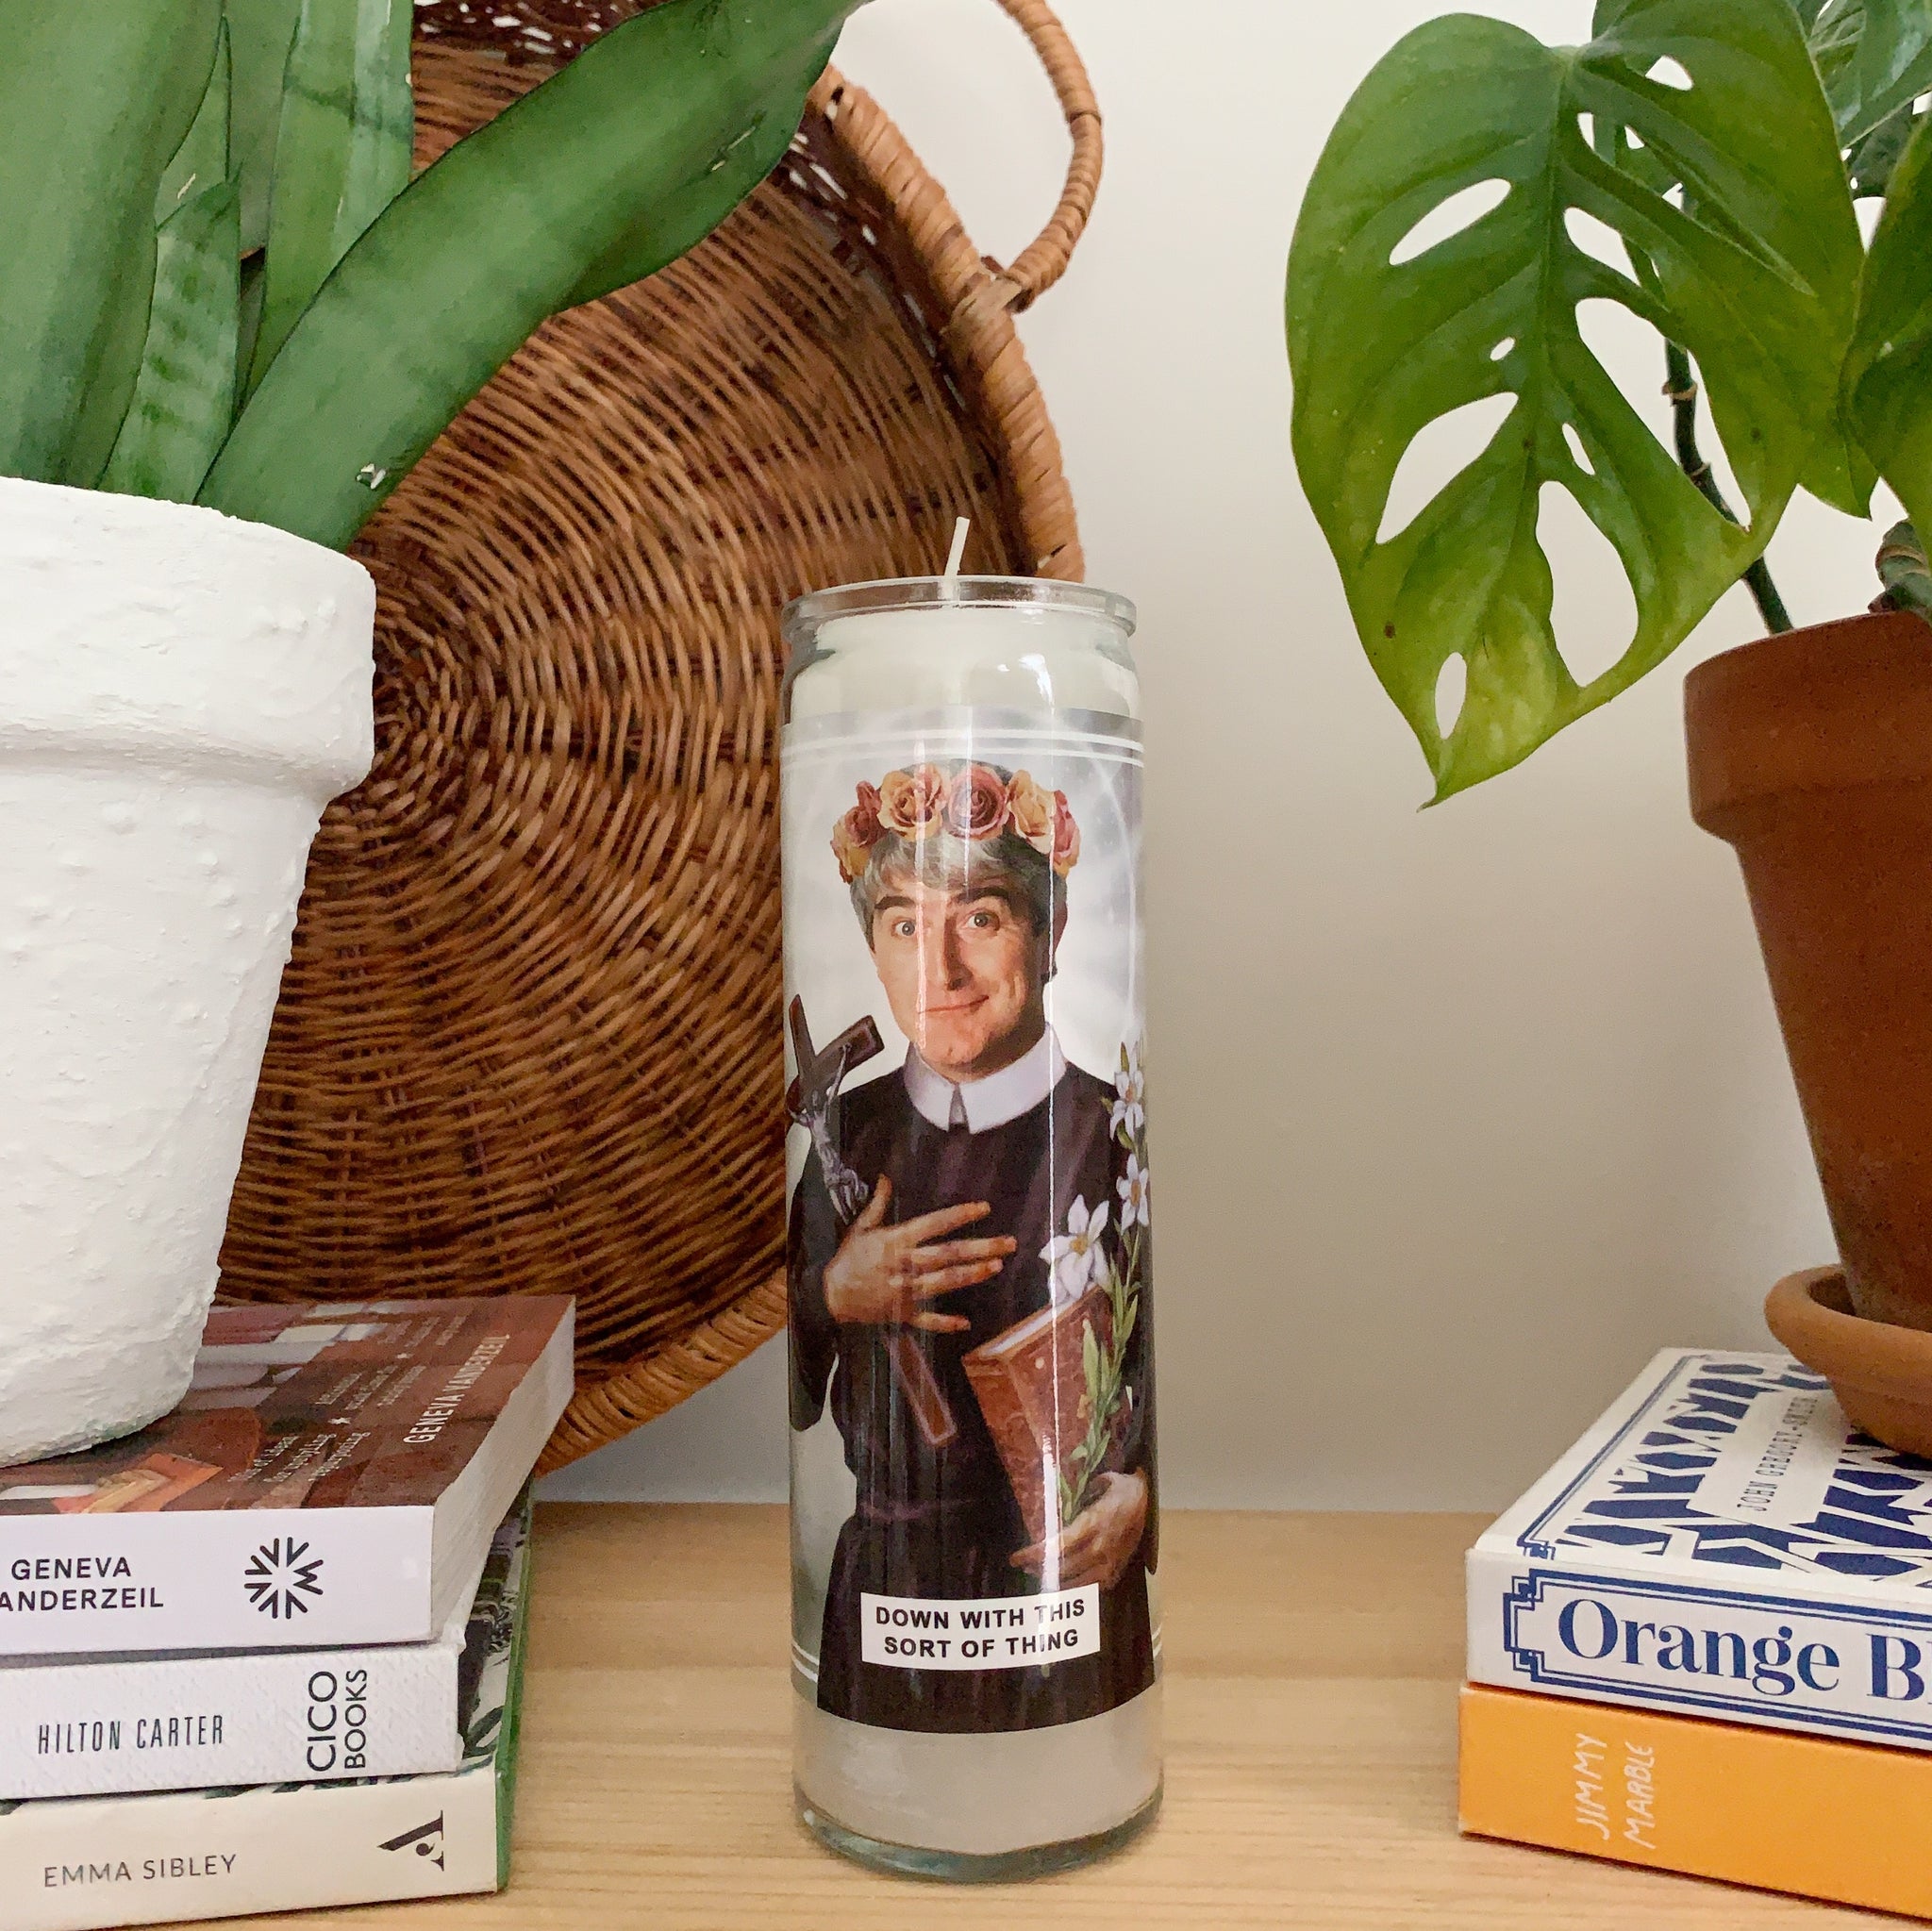 Saint Father Ted Crilly | Dermot Morgan Prayer Candle